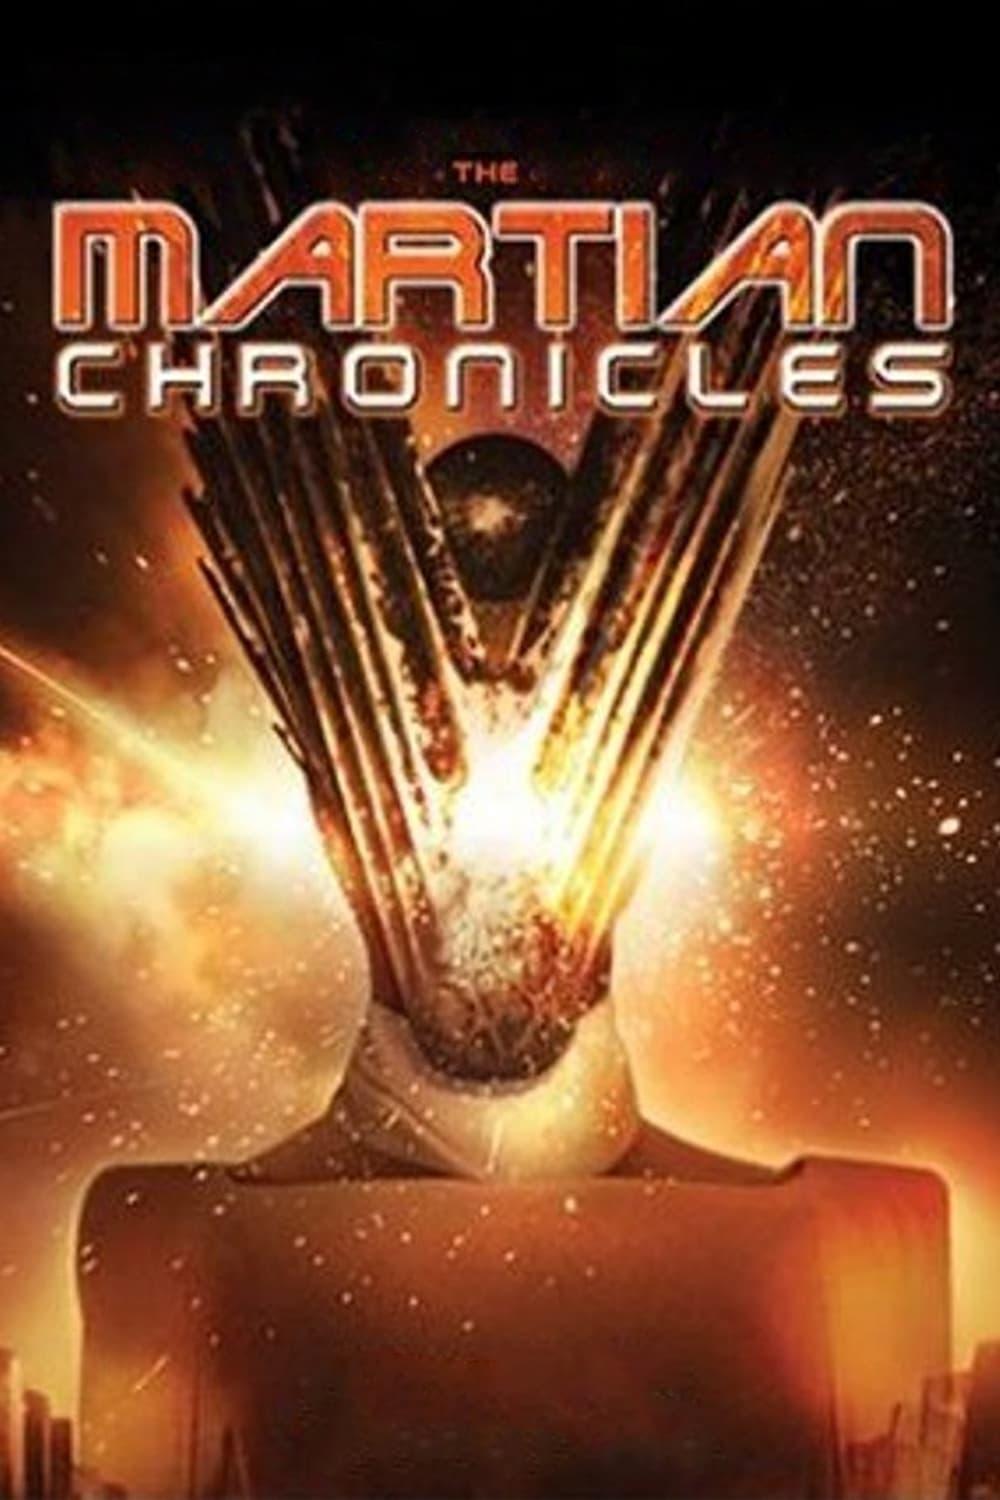 The Martian Chronicles poster